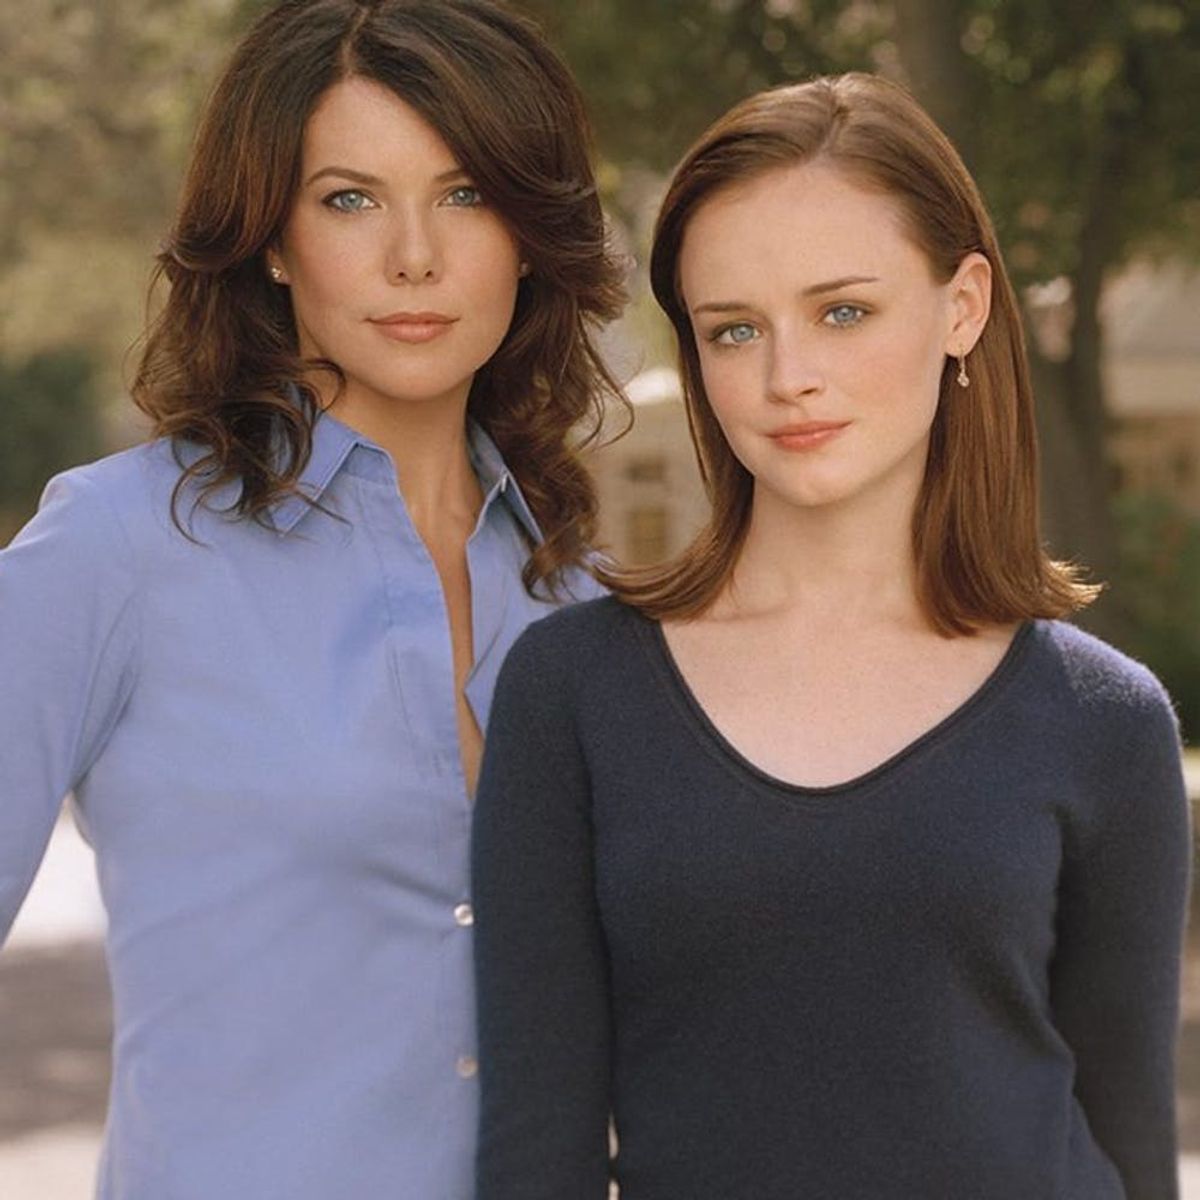 A Gilmore Girls Fan Festival Is Happening and We Want to Go